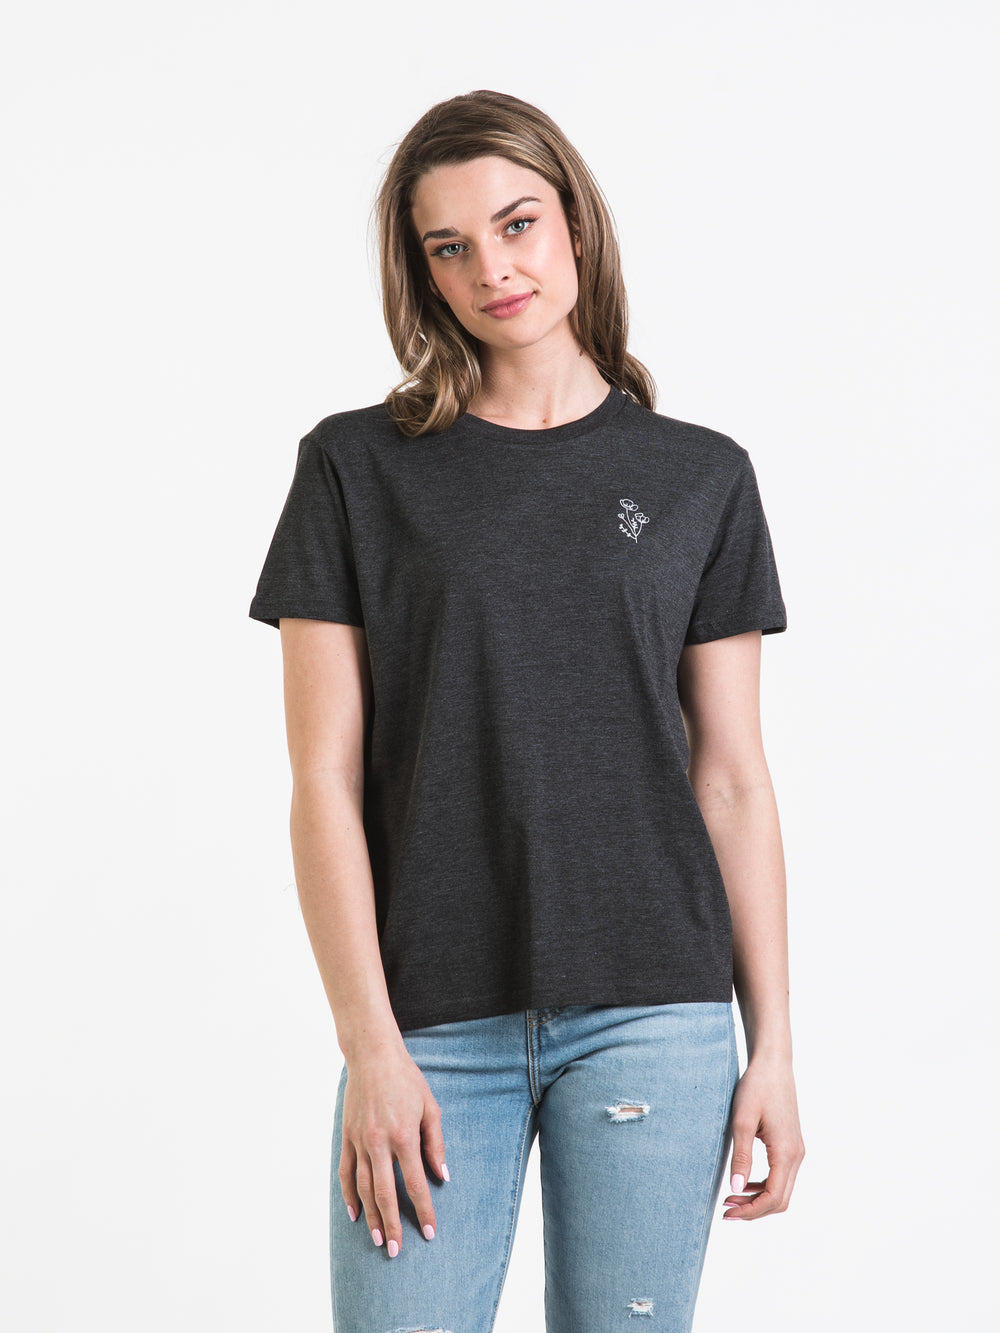 TENTREE WILDFLOWER EMBROIDERED T-SHIRT - CLEARANCE